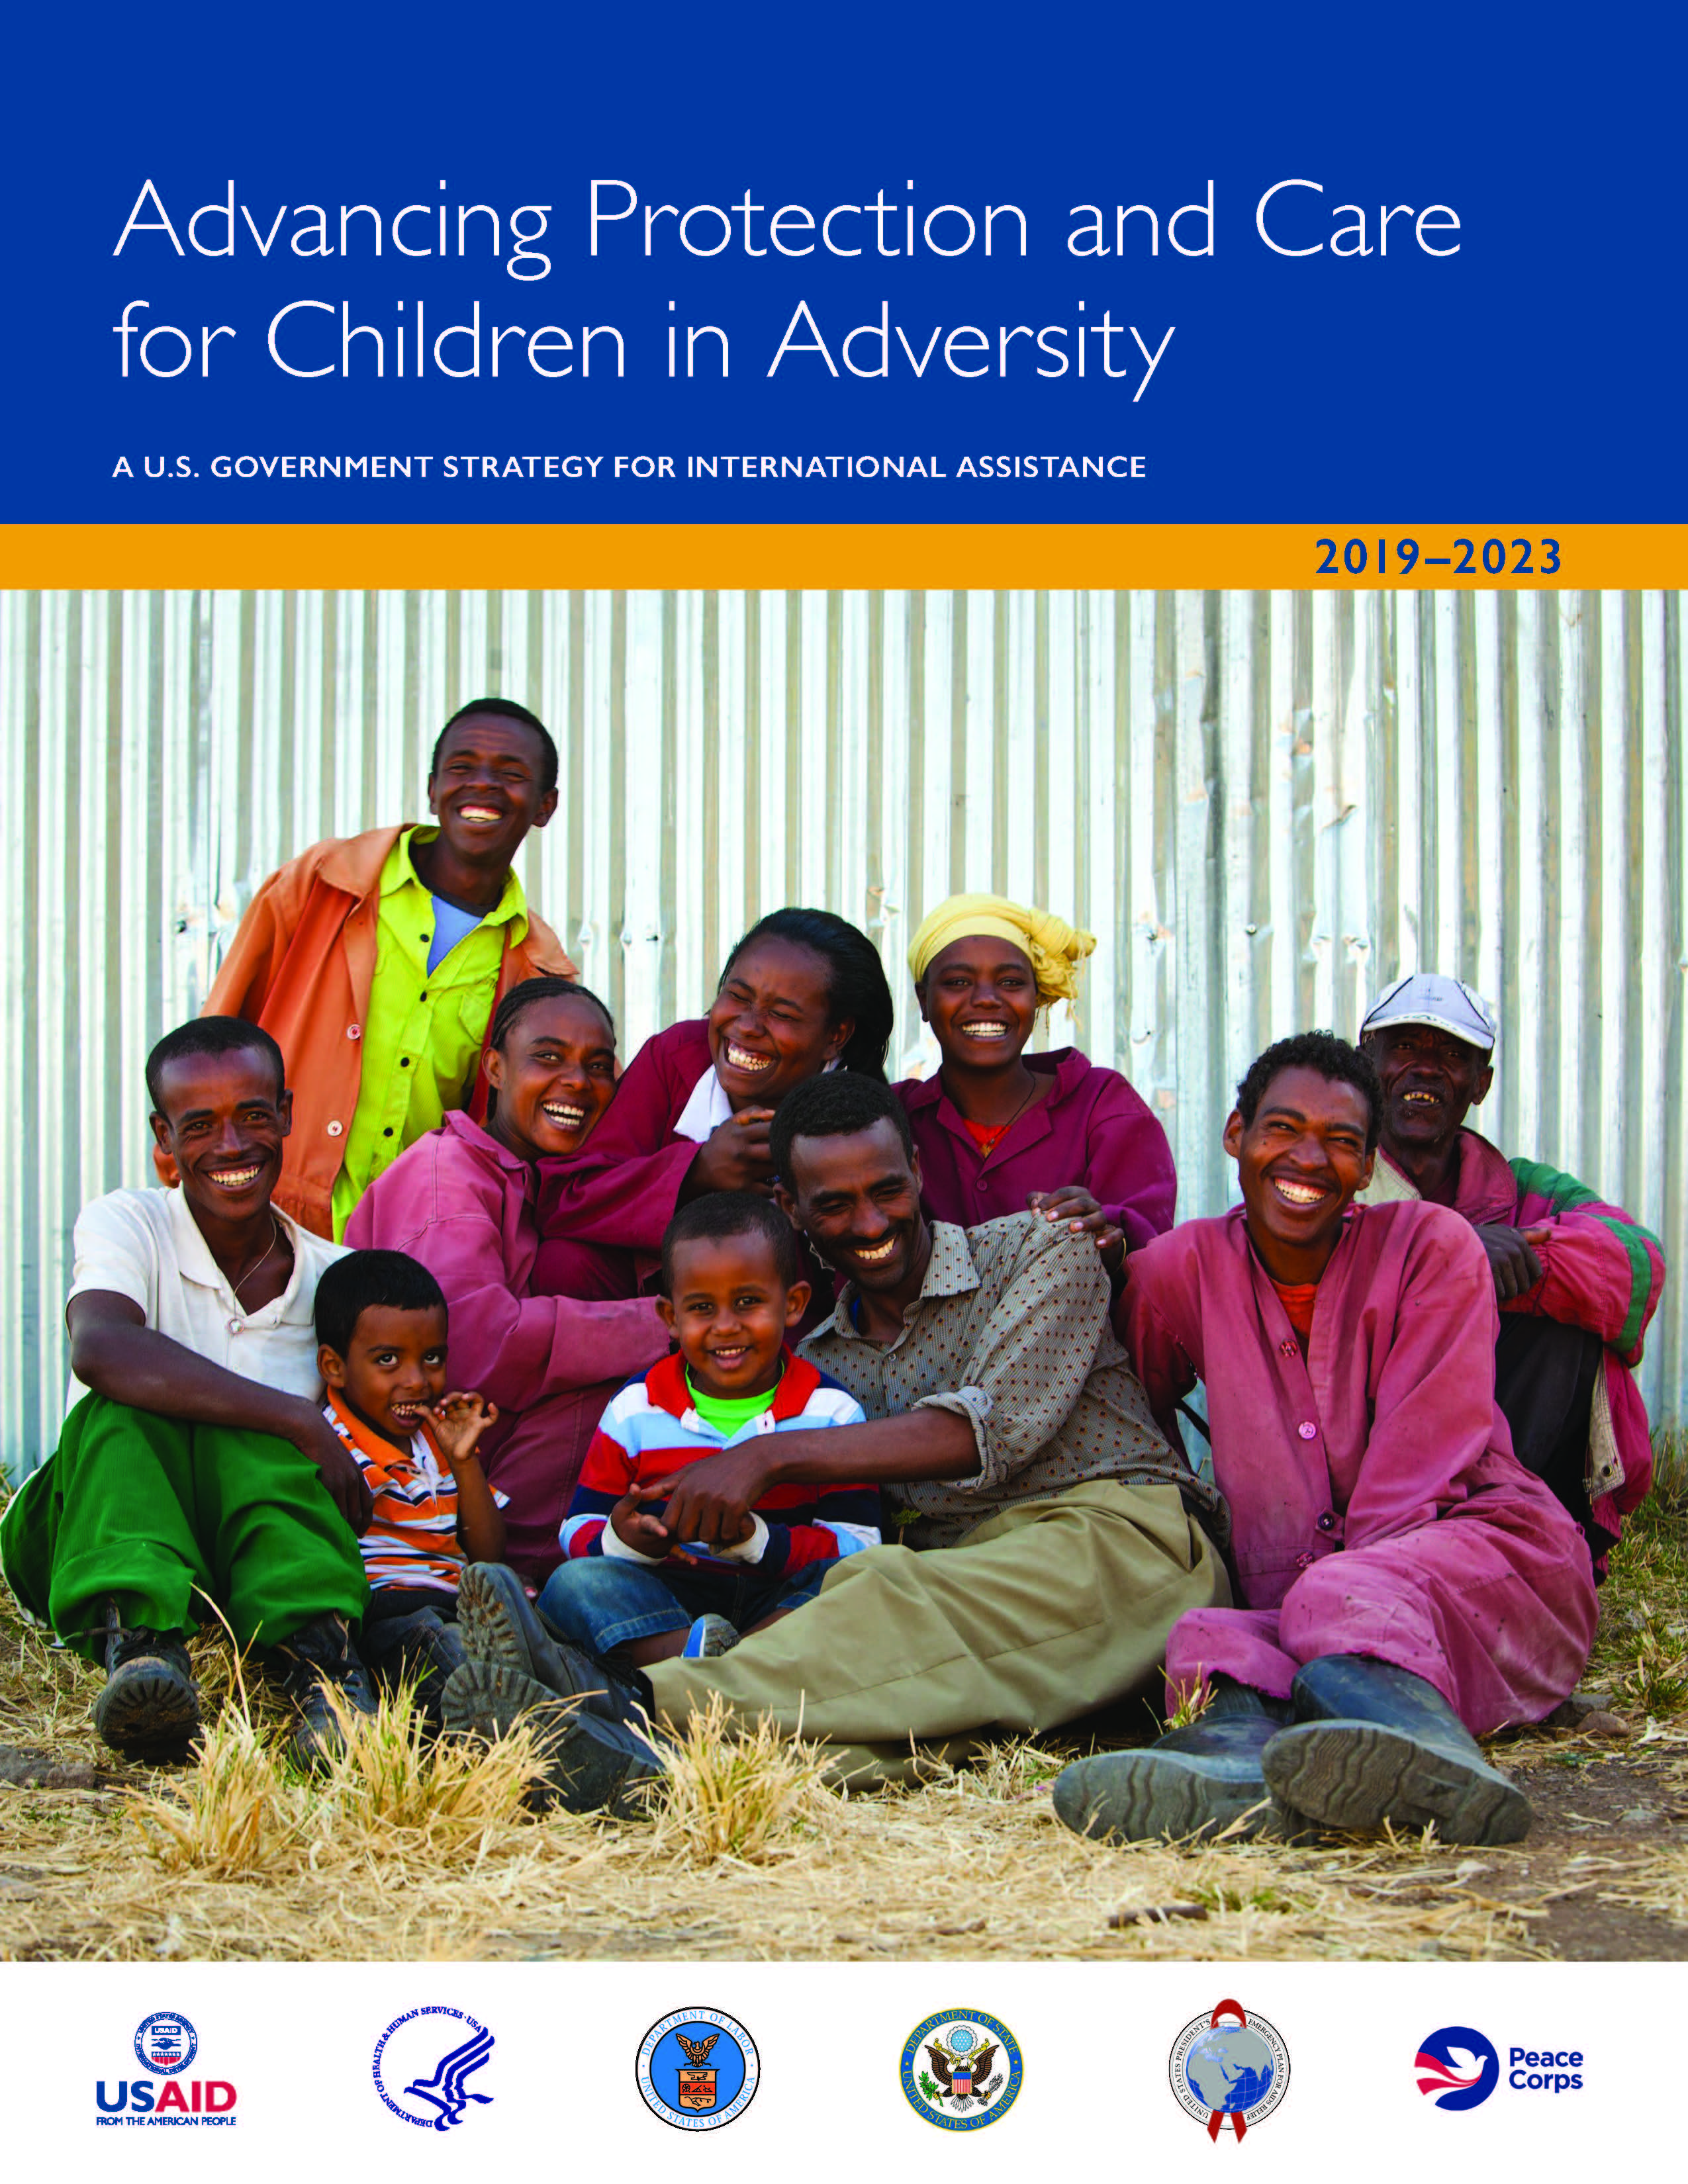 U.S. Government strategy for international assistance to children in adversity